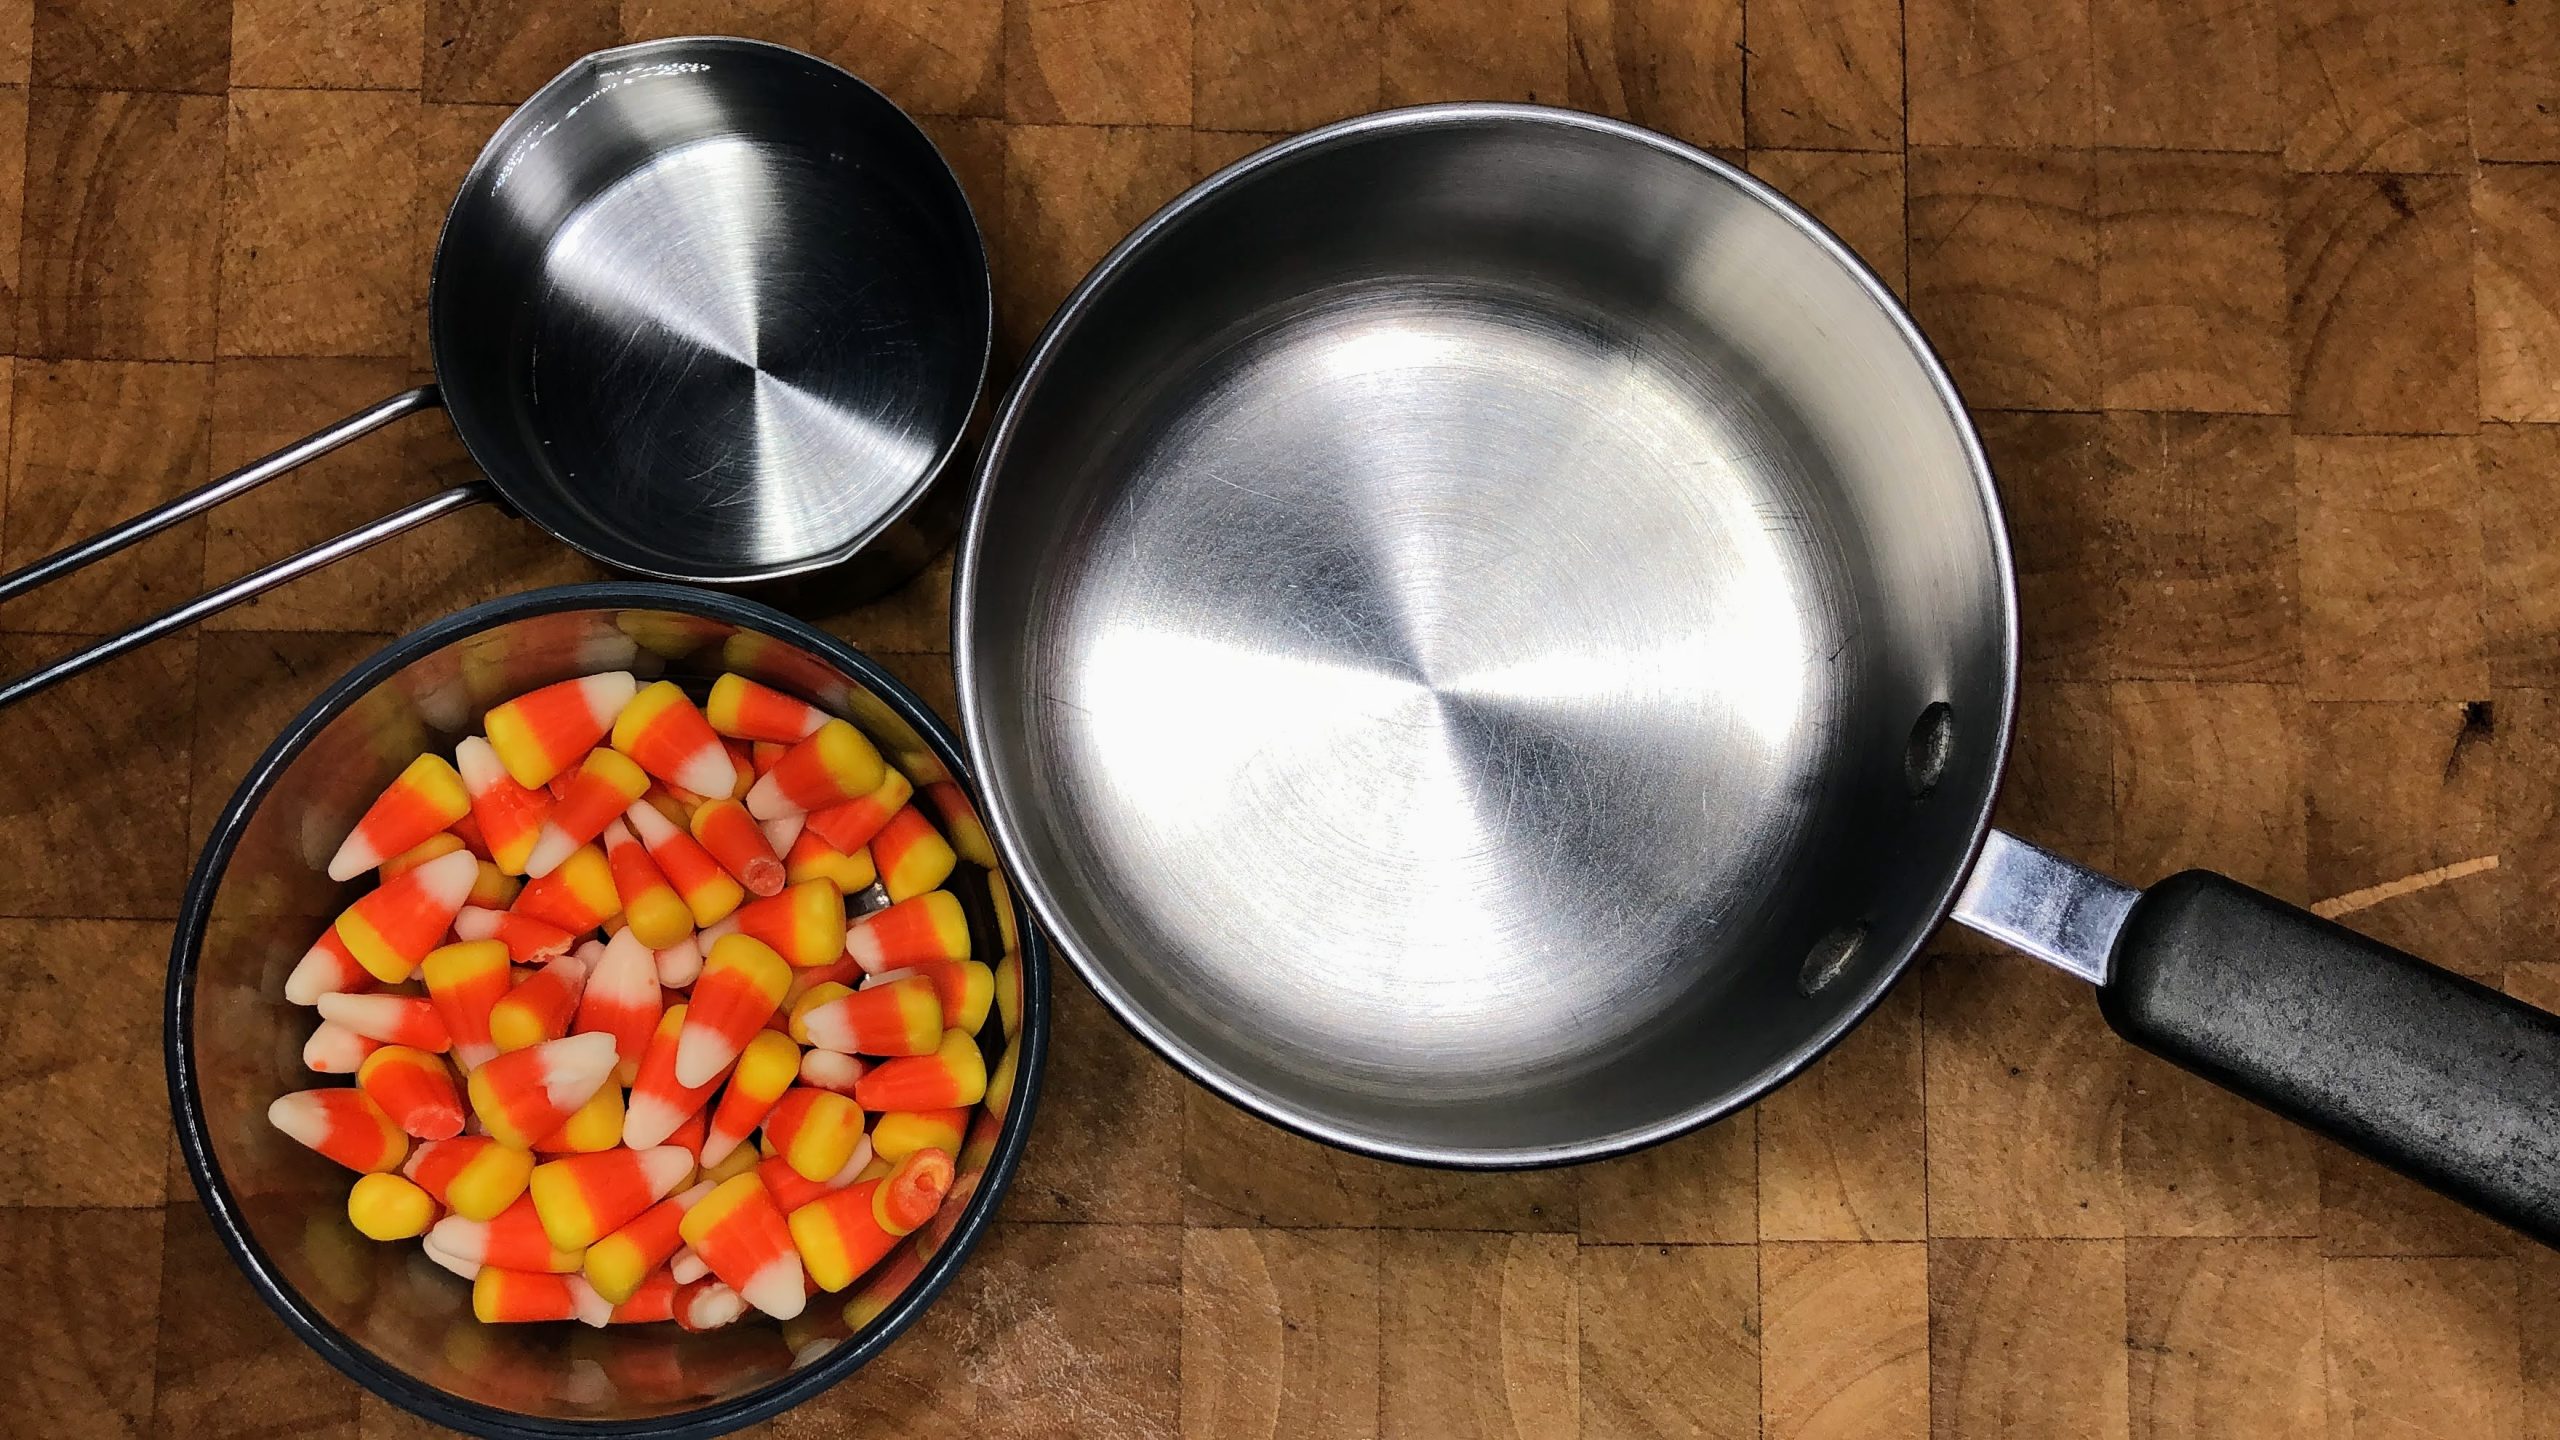 Candy corn and water next to a saucepan.